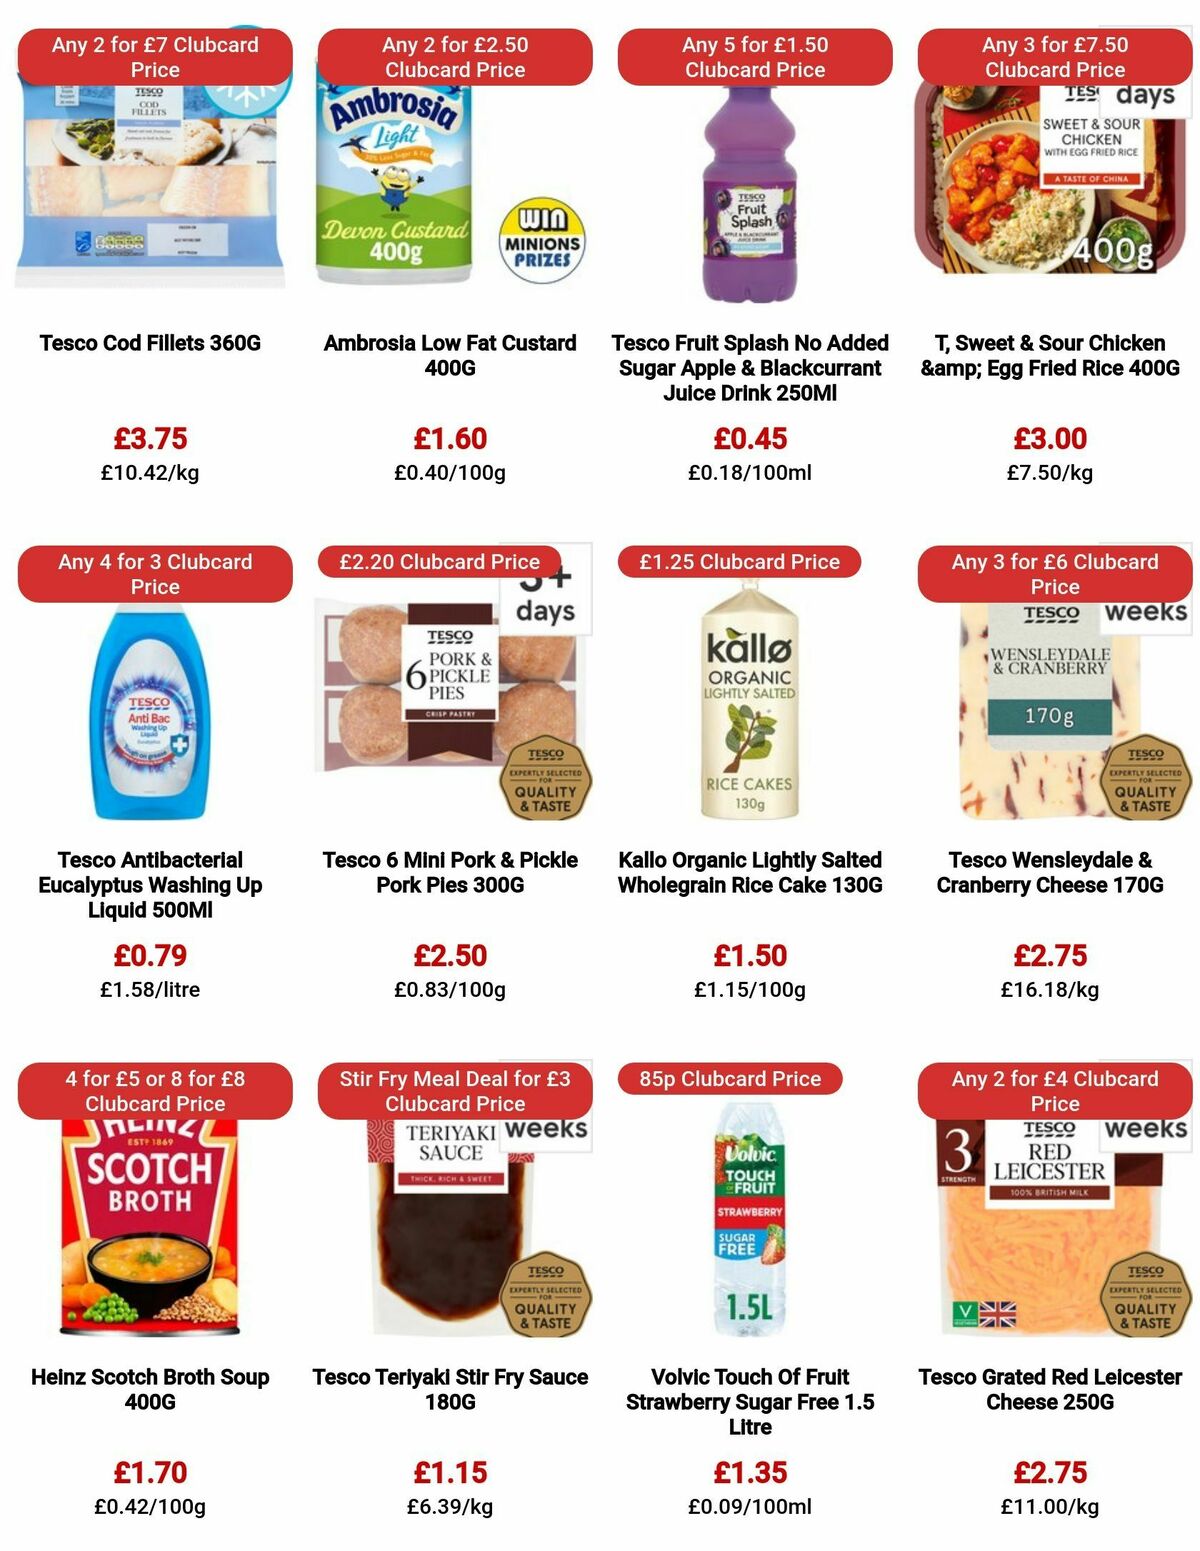 TESCO Offers from 24 August